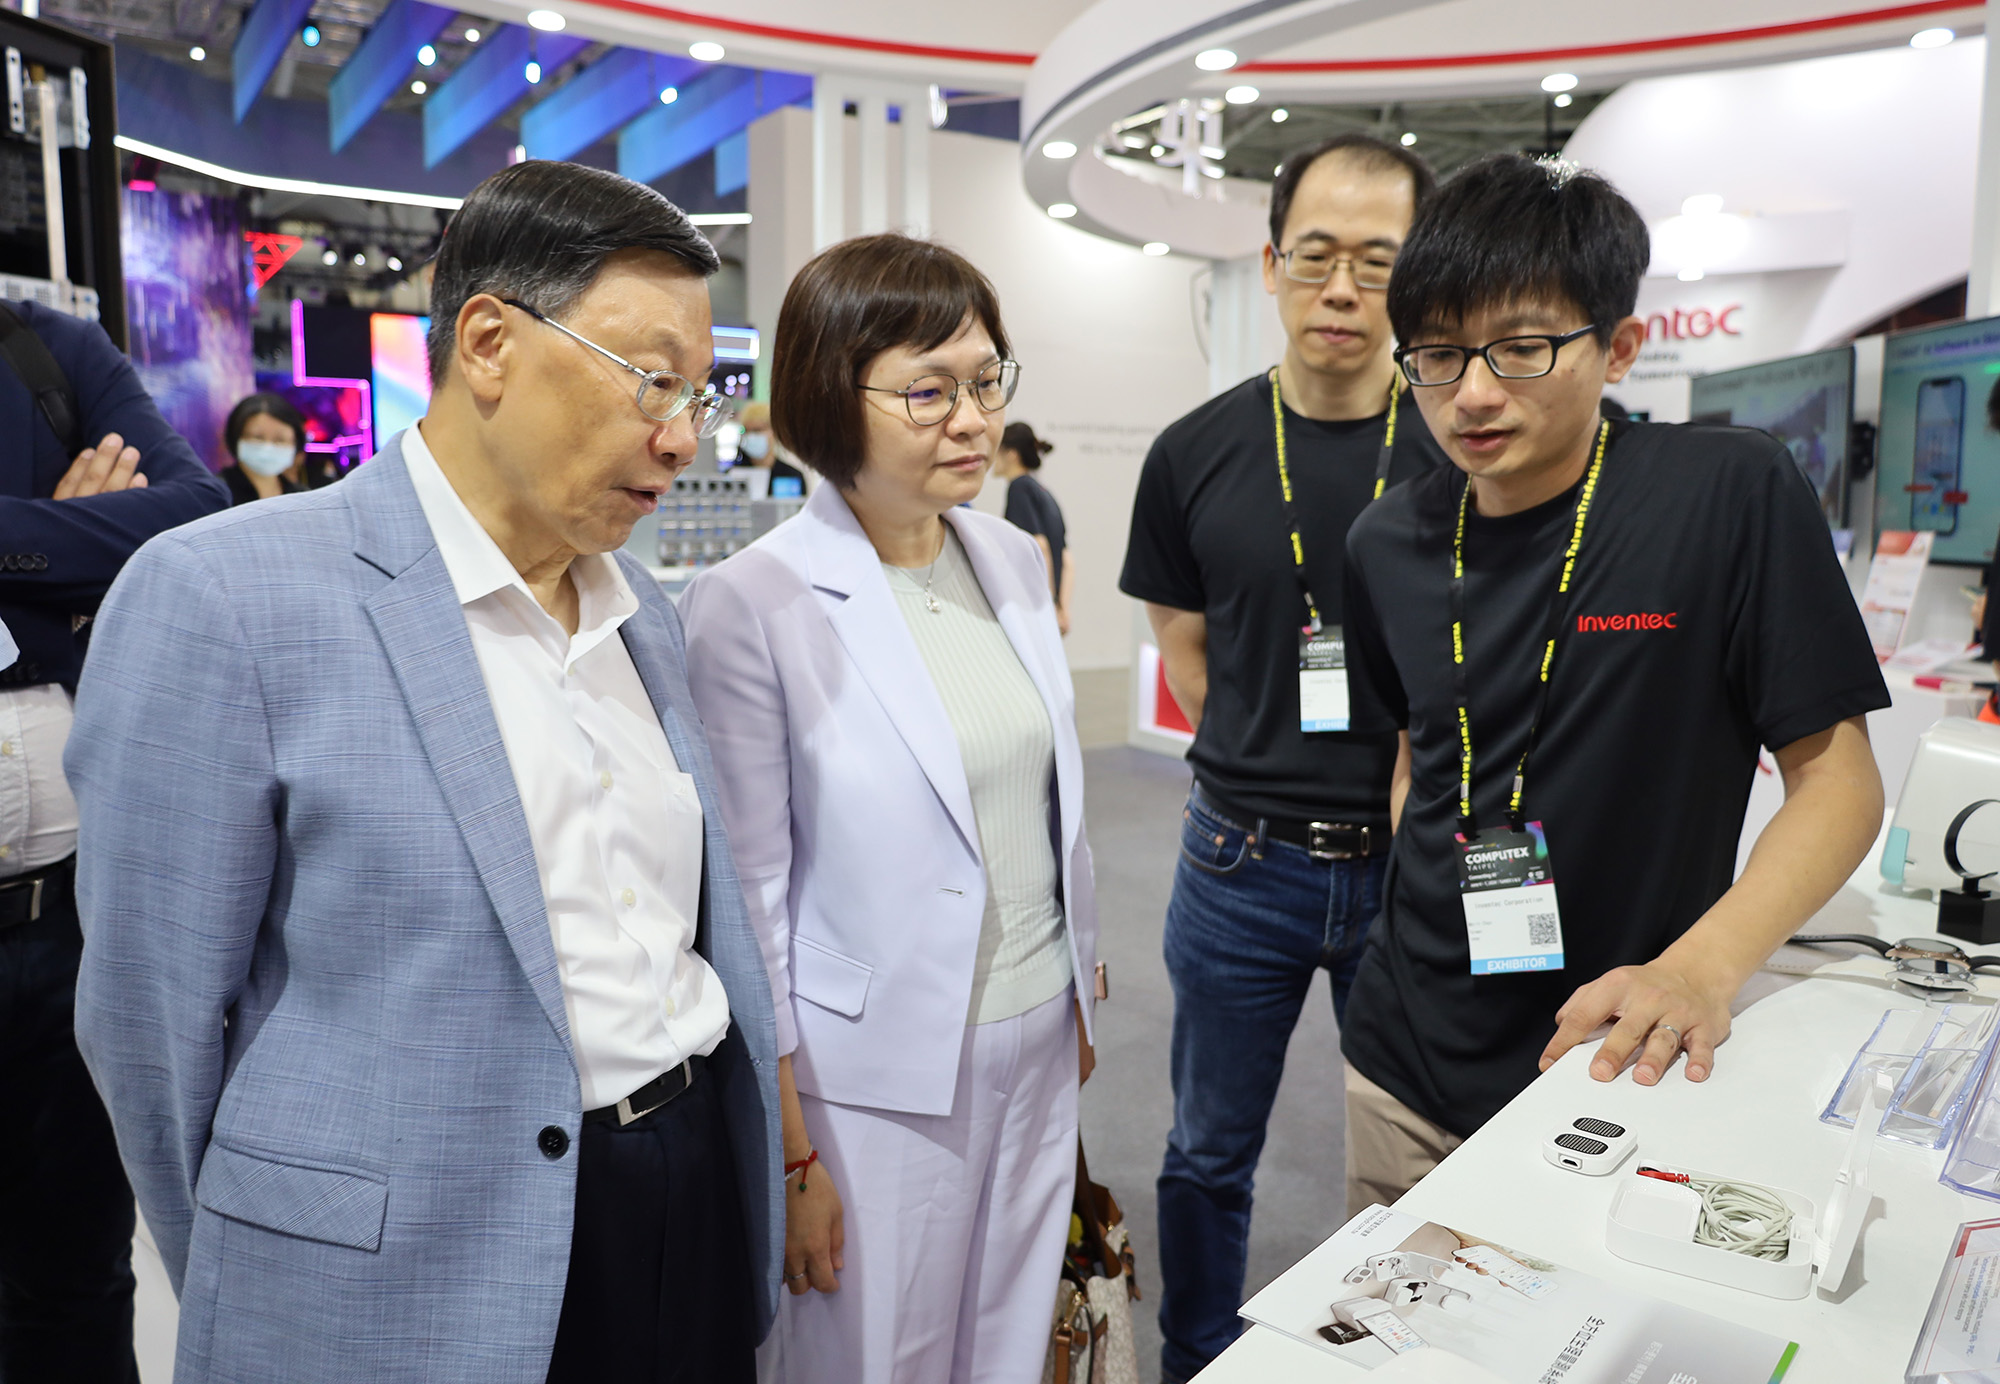 President Jeffrey J.P. Tsai of Asia University (left 1) and Dean Hua-Shan Wu of the College of Nursing (left 2) at Inventec's booth at Computex, learning about its smart healthcare applications